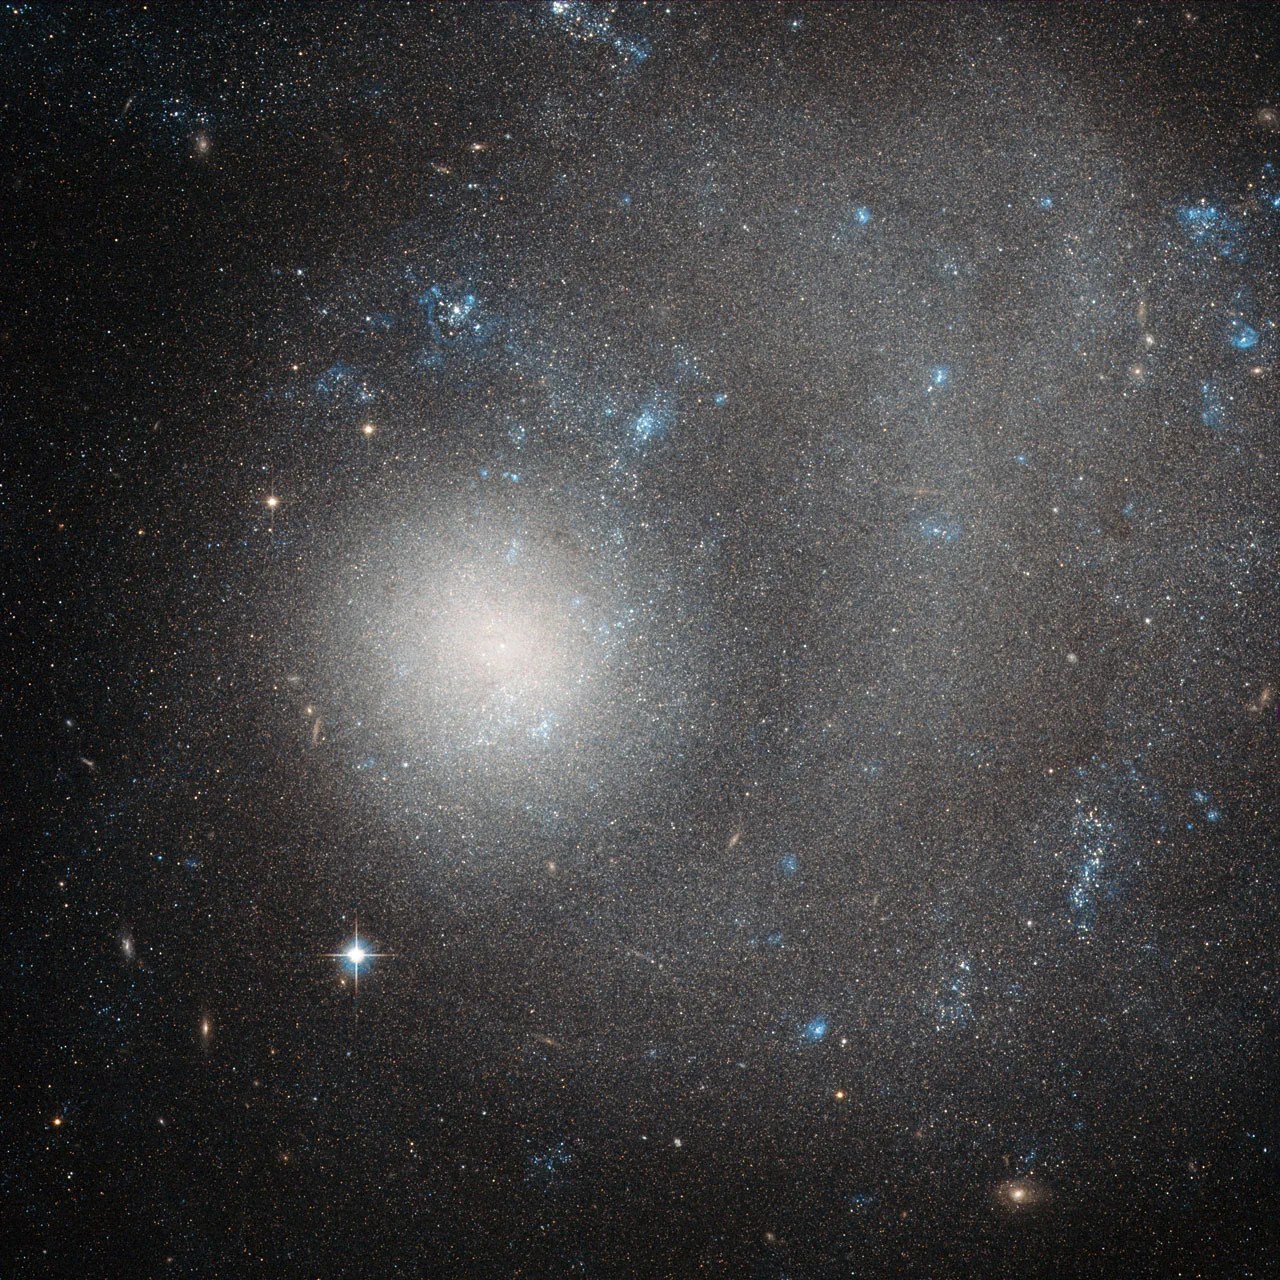 Hubble image of dwarf galaxy ngc 5474;  a diffuse blob of stars off-centered with a vague swirl stretching right and up.